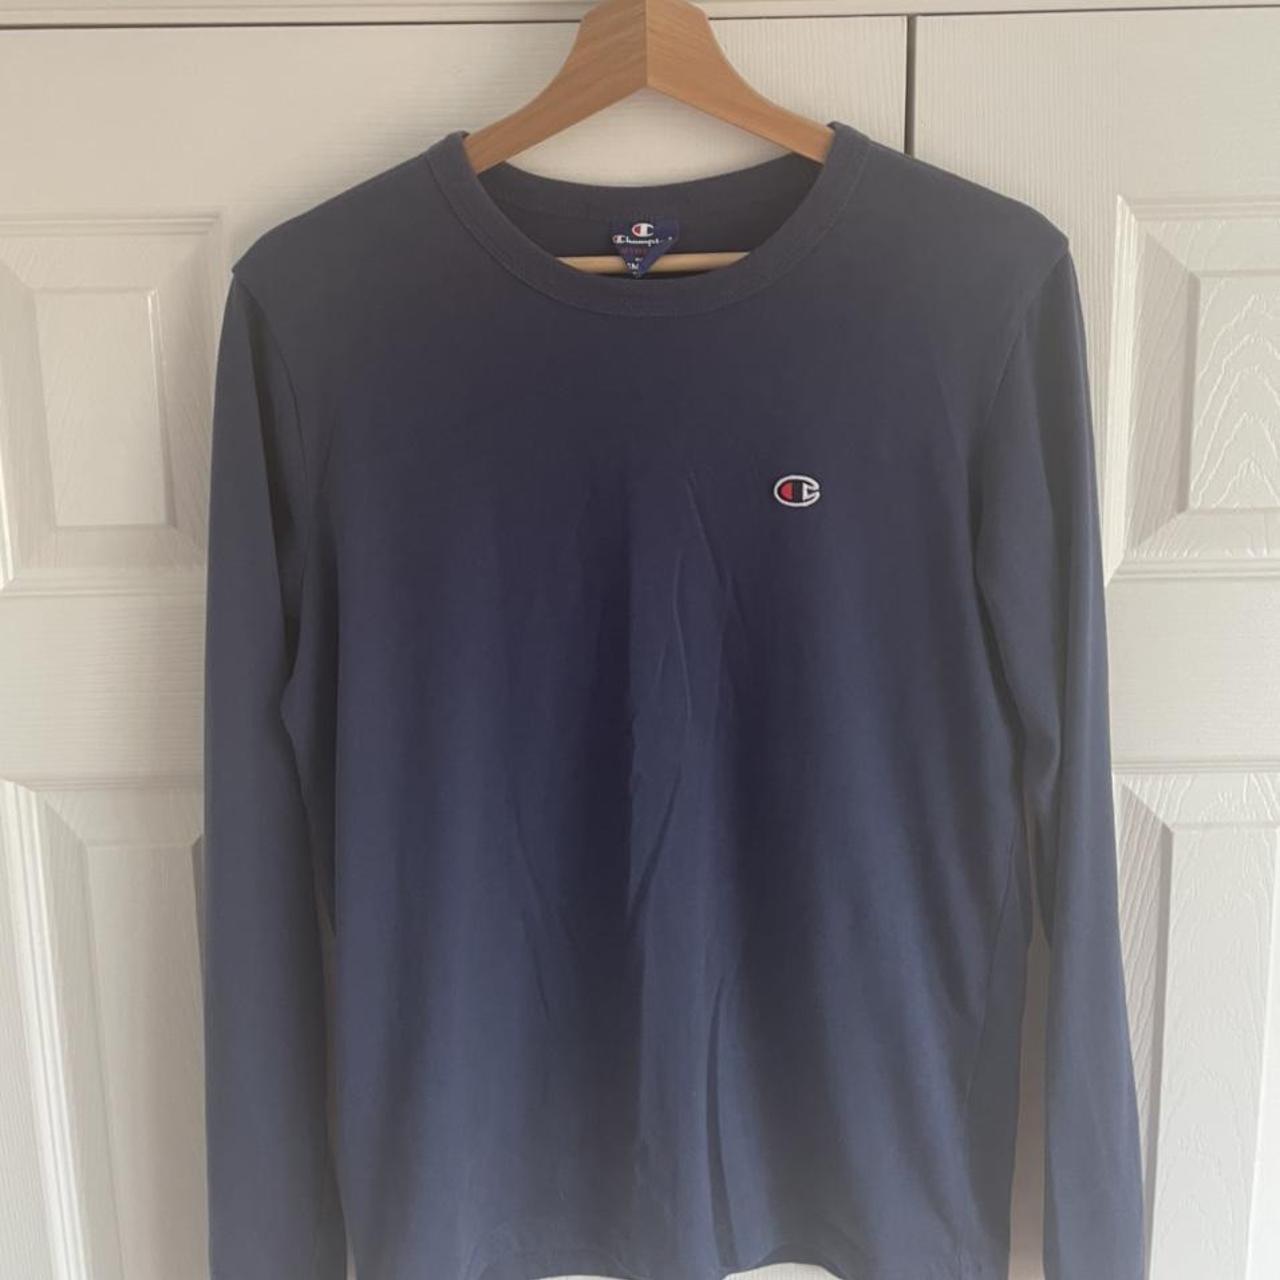 Product Image 1 - Navy Champion long sleeve
Men’s Small

#champion#mens#small#navy#authentic